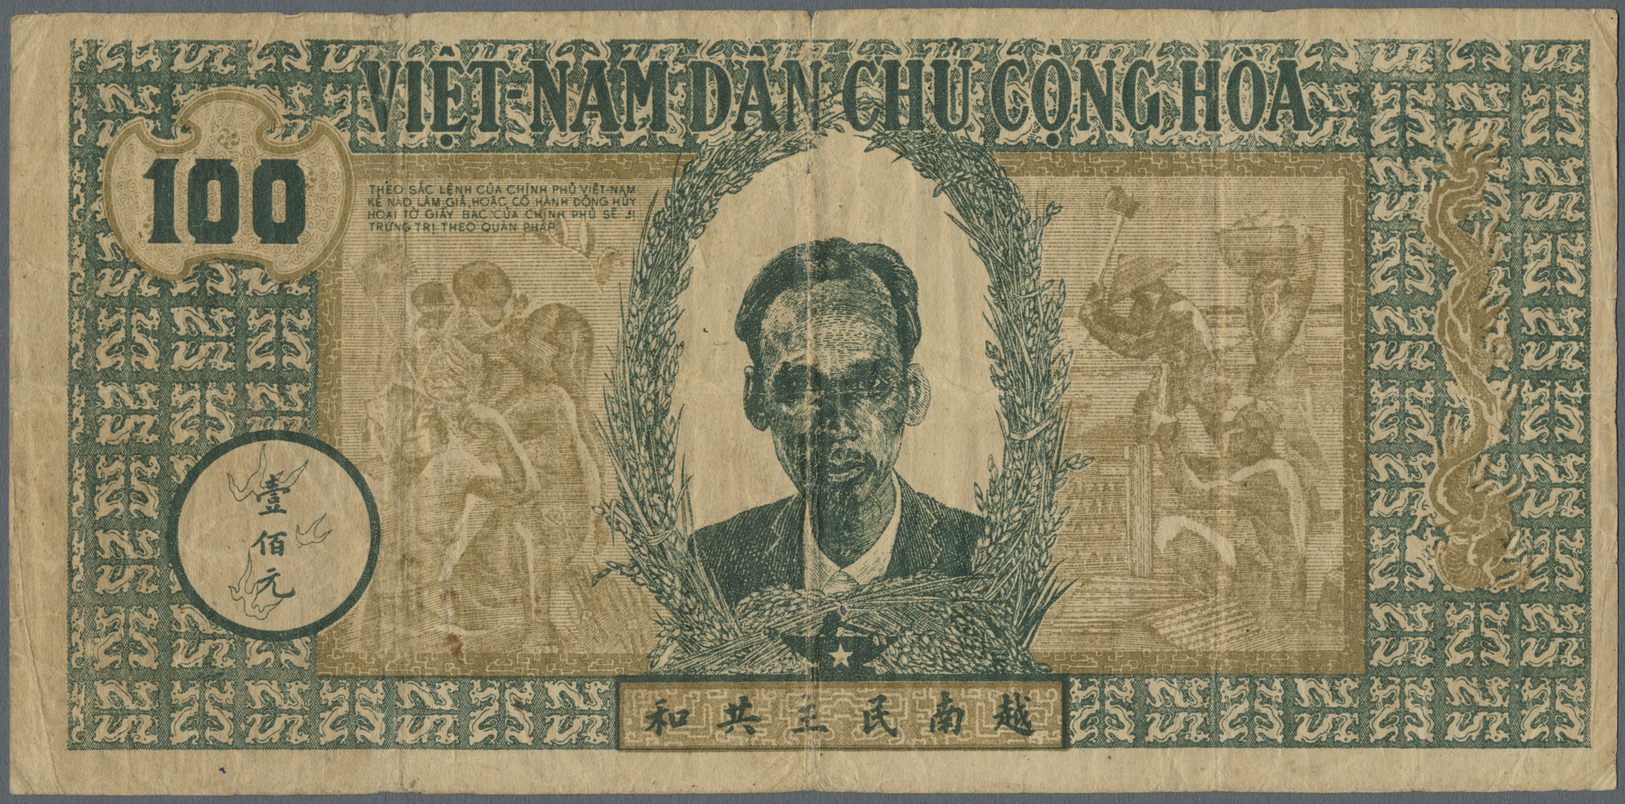 03493 Vietnam: 100 Dong ND P. 8d, Strong Center Fold Which Causes Holes In Paper, Several Other Folds, But No Repairs, C - Viêt-Nam